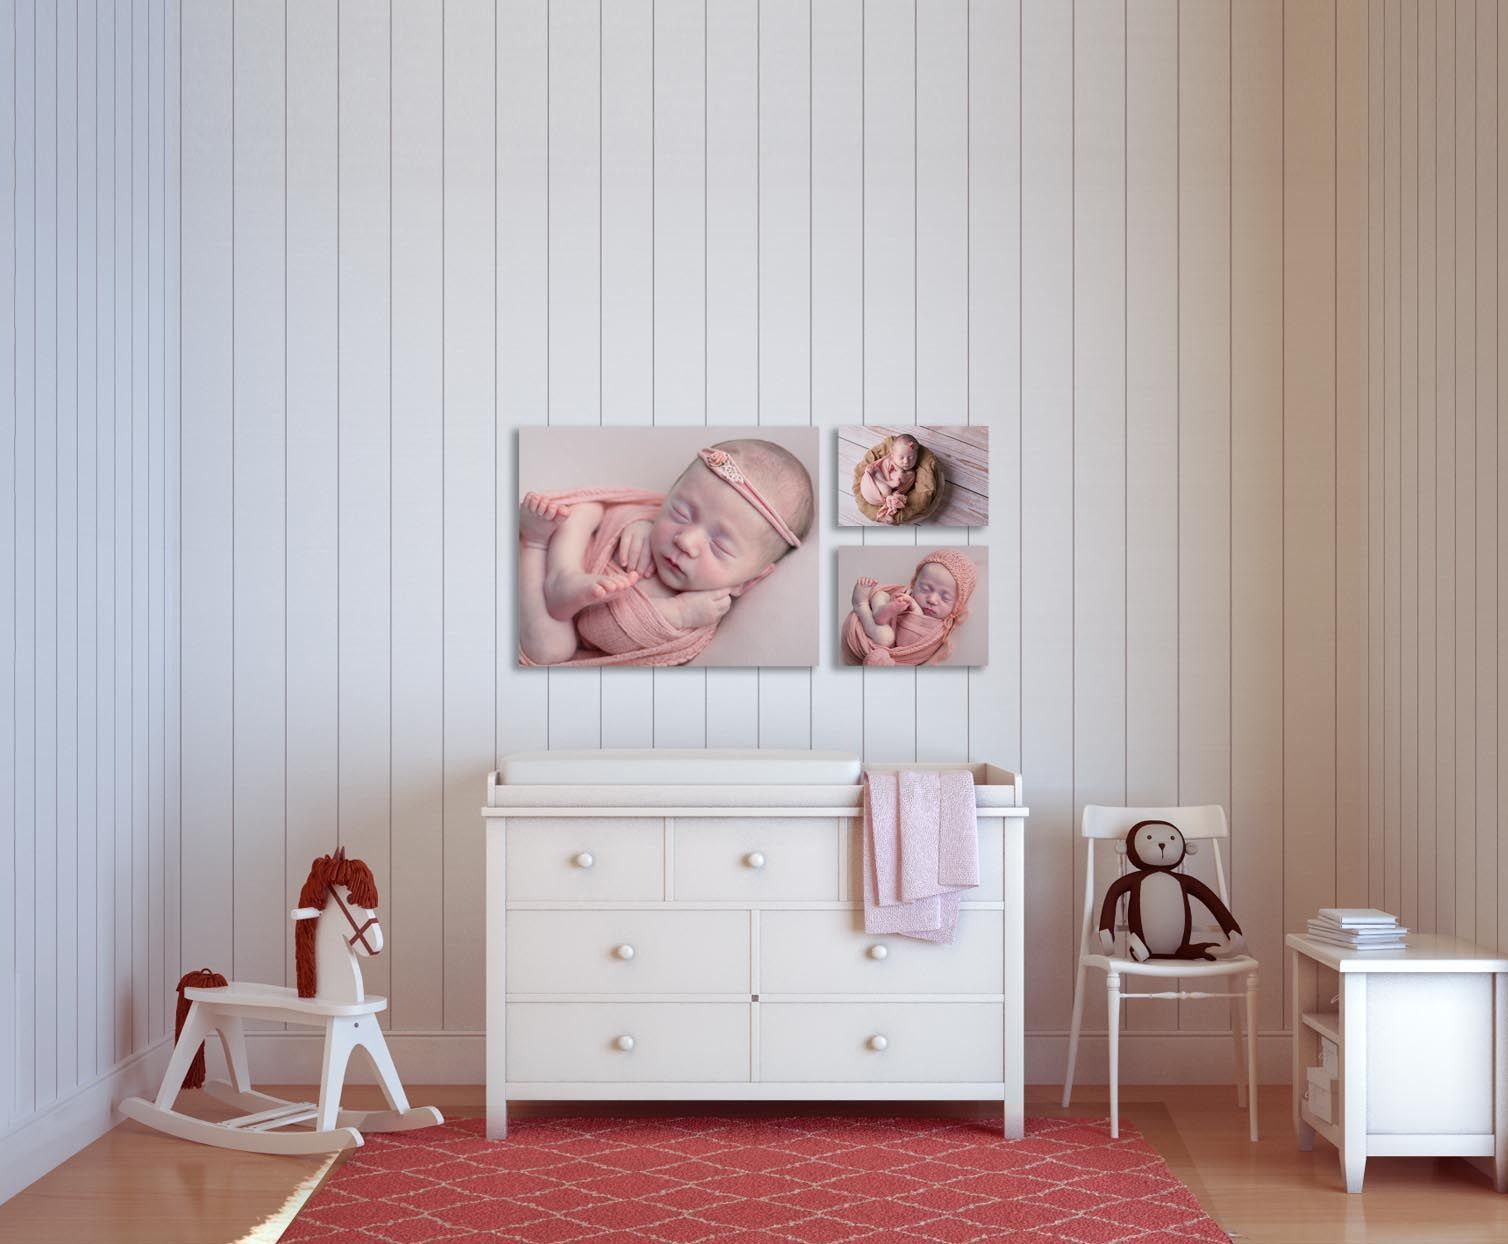 Glendale Newborn  girl nursery with a  collection of her newborn photos. White furniture and crib. 